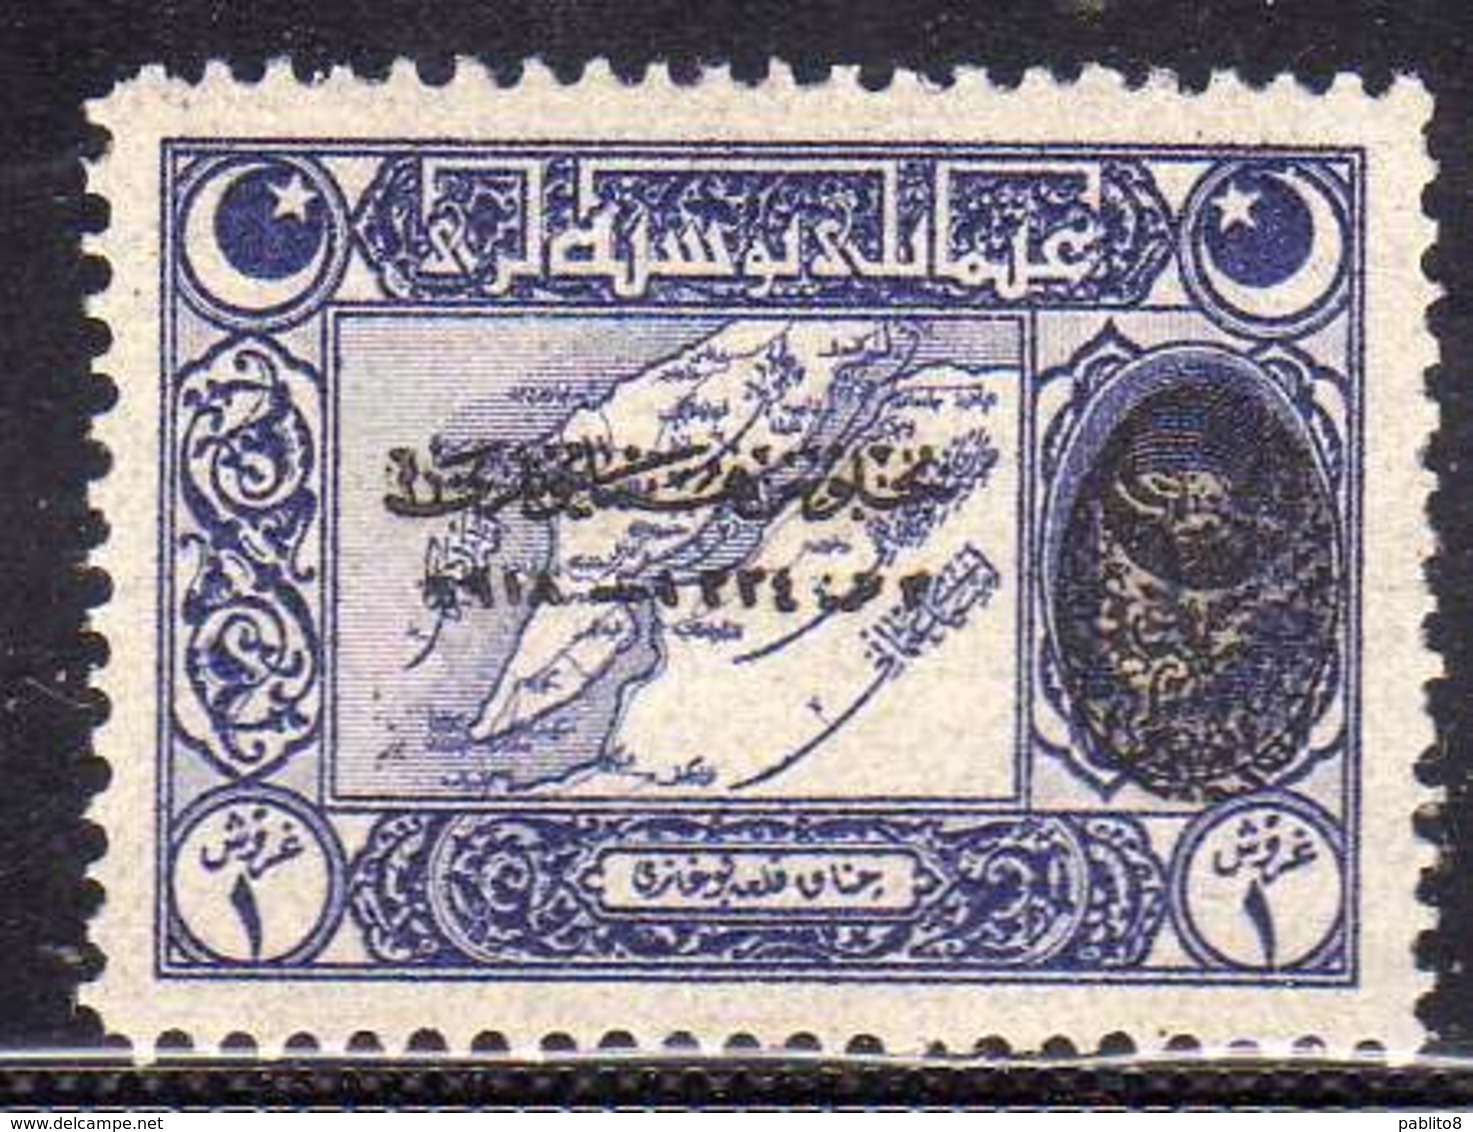 TURCHIA TURKÍA TURKEY 1919 POSTAGE DUE STAMPS SEGNATASSE TAXE ACCESSION TO THE THRONE ISSUE On MAP DARDANELLES 1pi MNH - Strafport